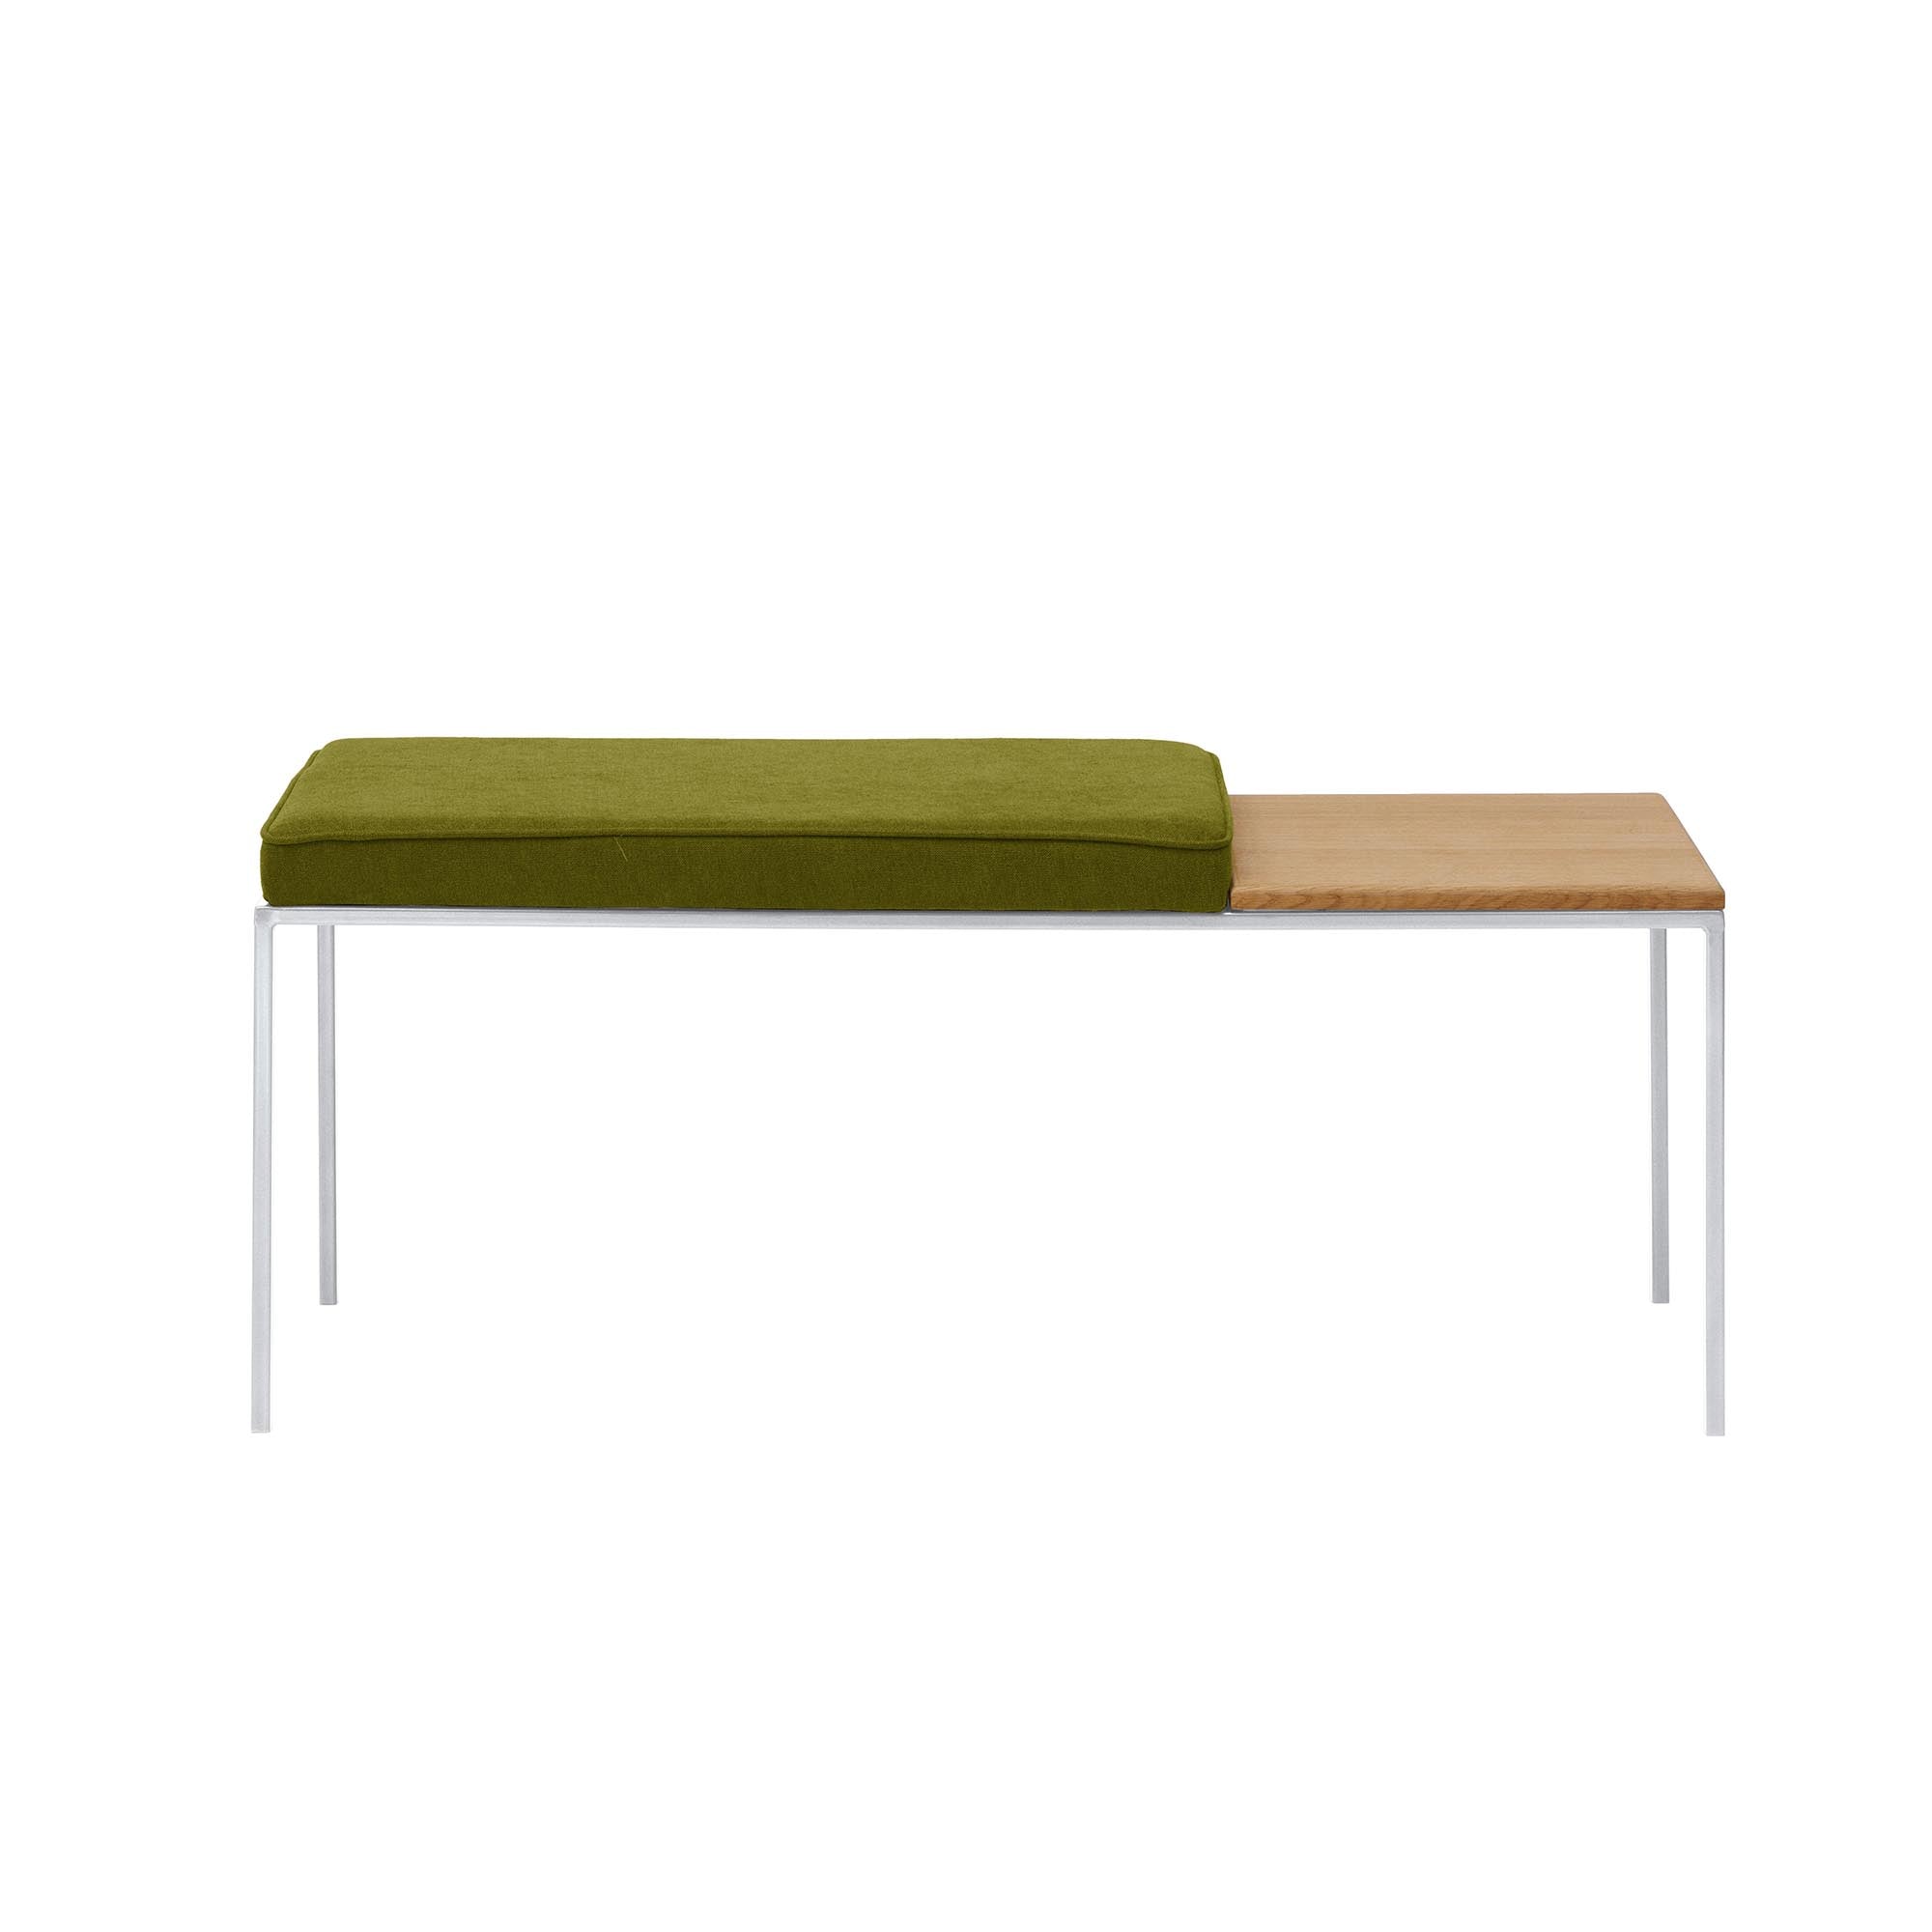 Oak Wood Seat, Natural Colour white frame, front view green fabric